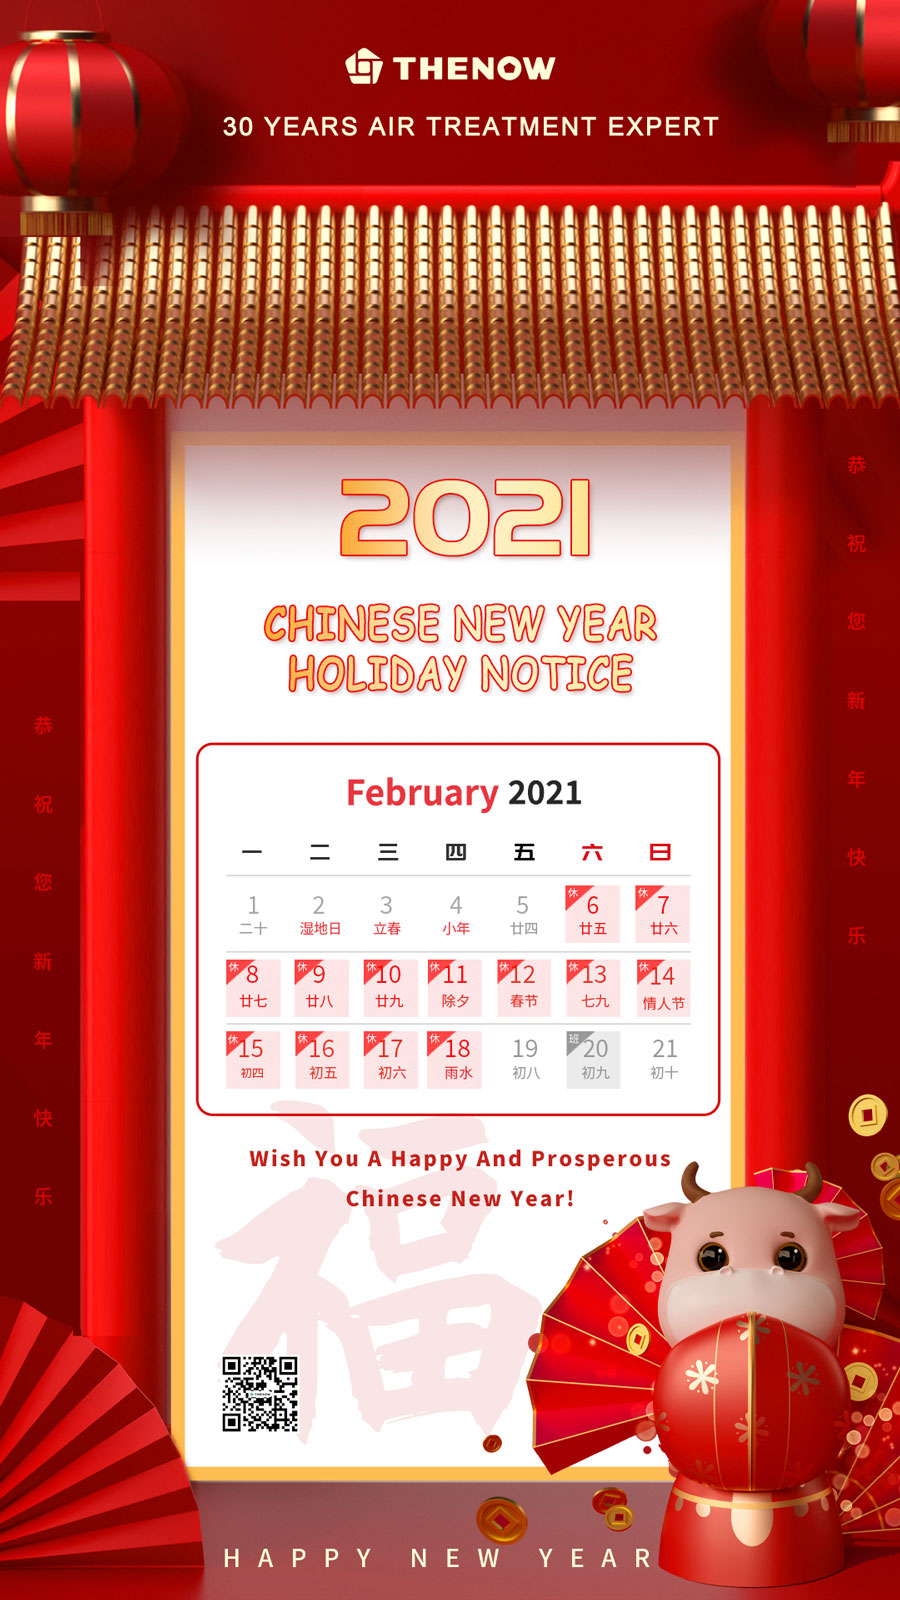 2021 New Year Holiday Notice